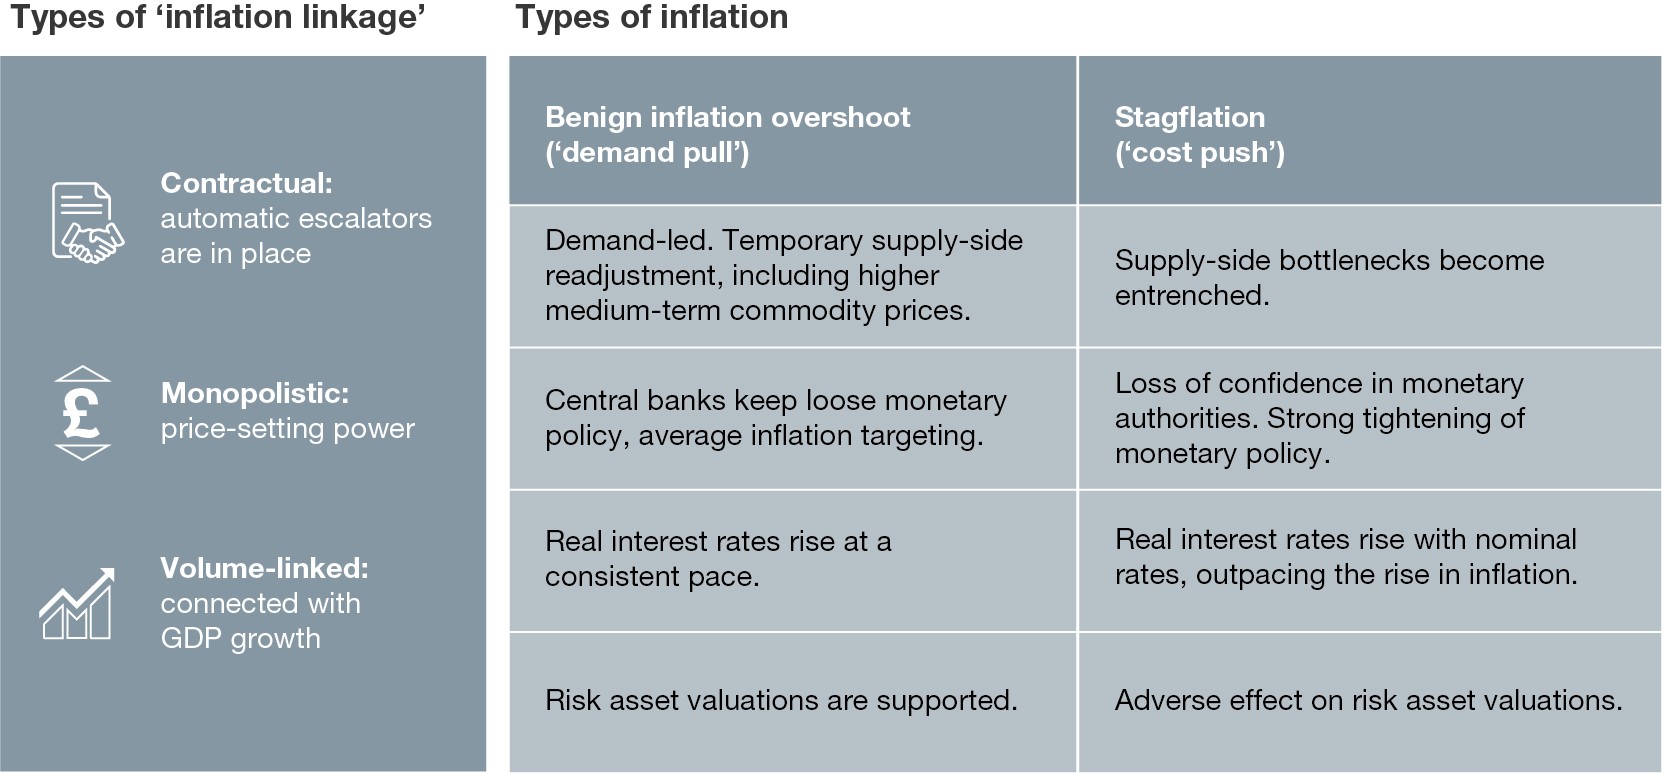 Different types of ‘inflation linkage’ in revenue model (left); different types of inflation (right)